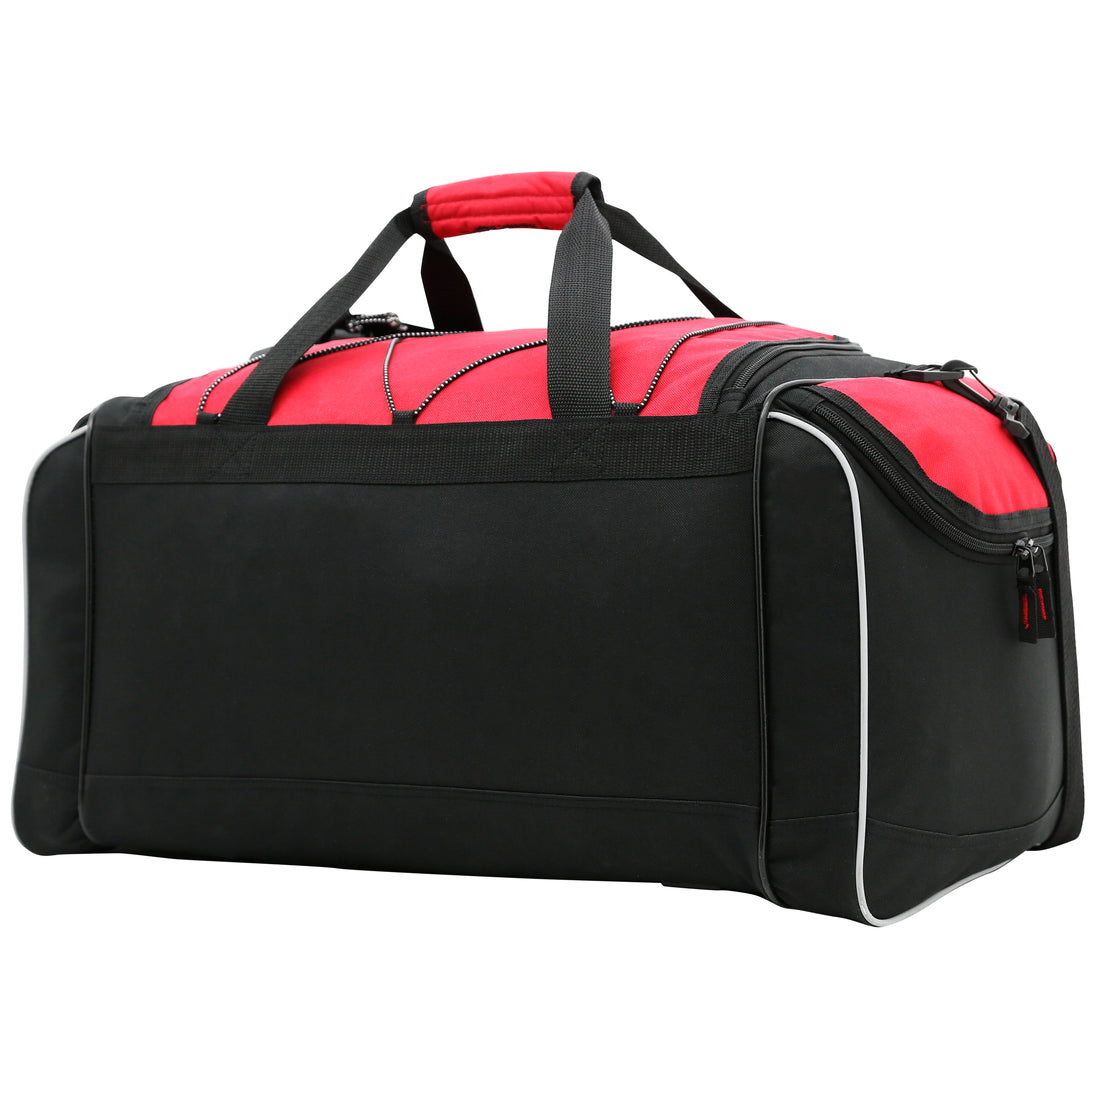 Large storage outdoor Sports luggage Tote duffle travel gym bags with shoes compartment